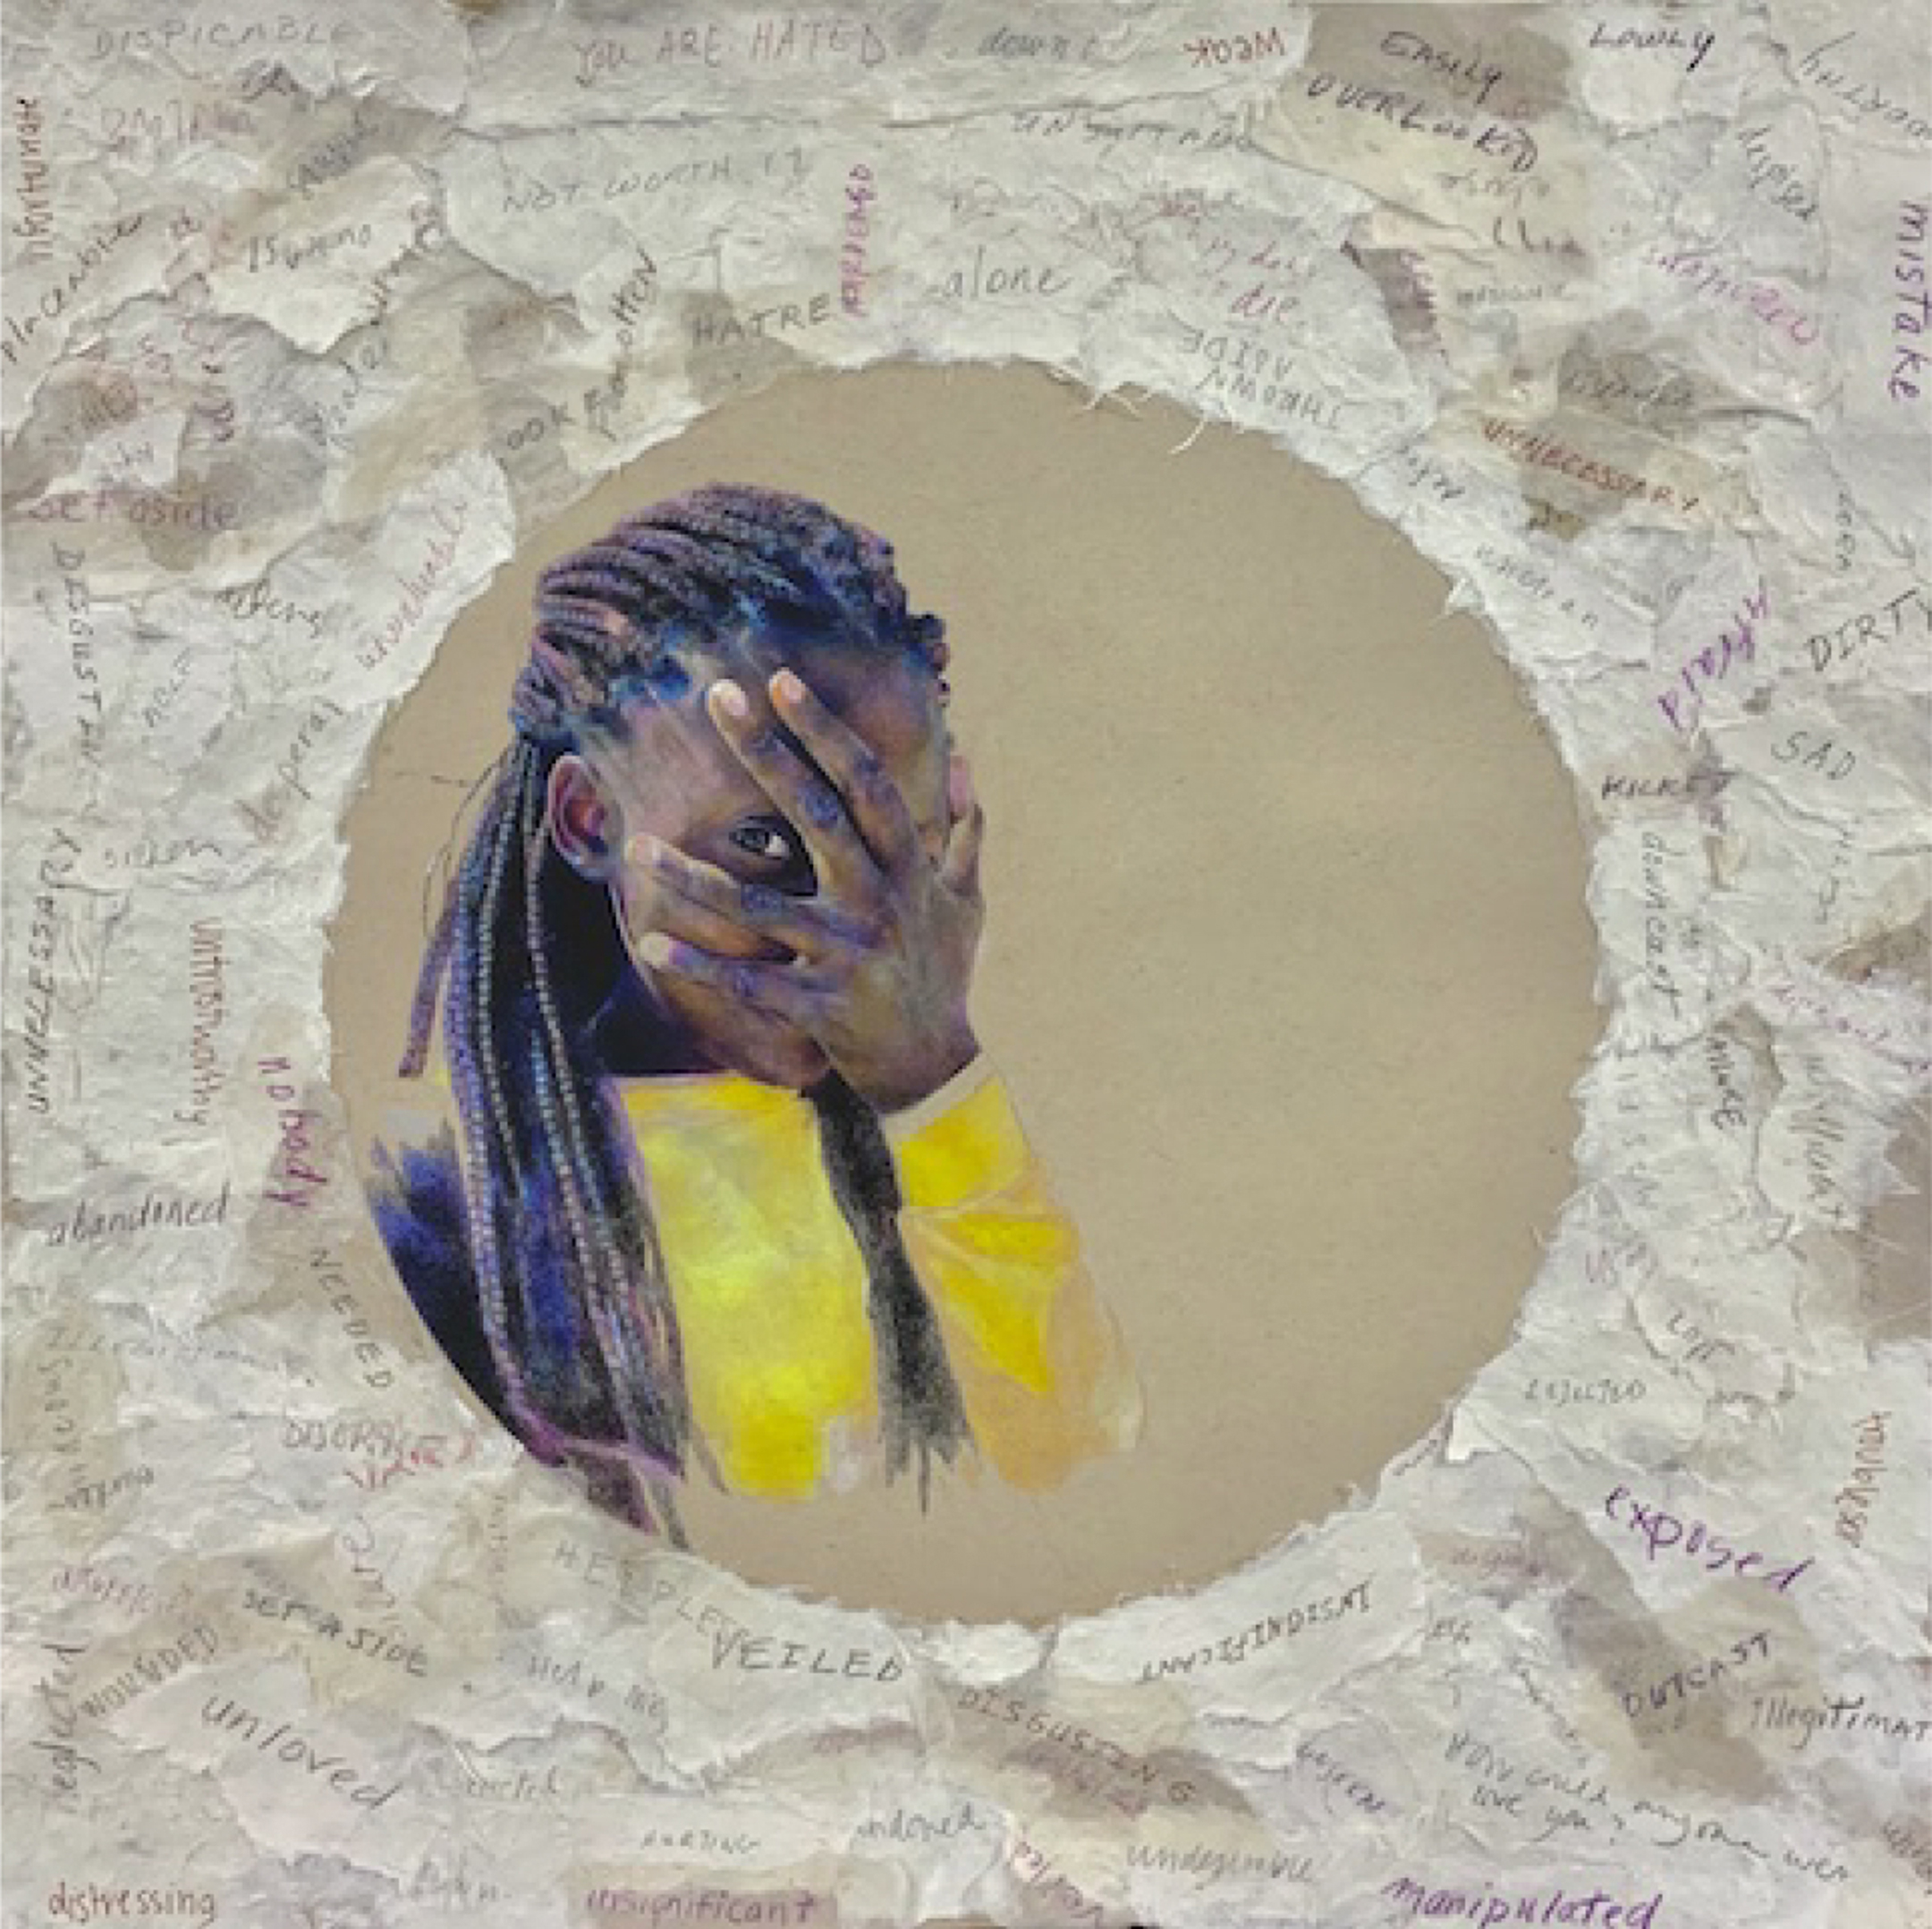 Illustration of a young black woman holding one hand to her face, seen through a circle 